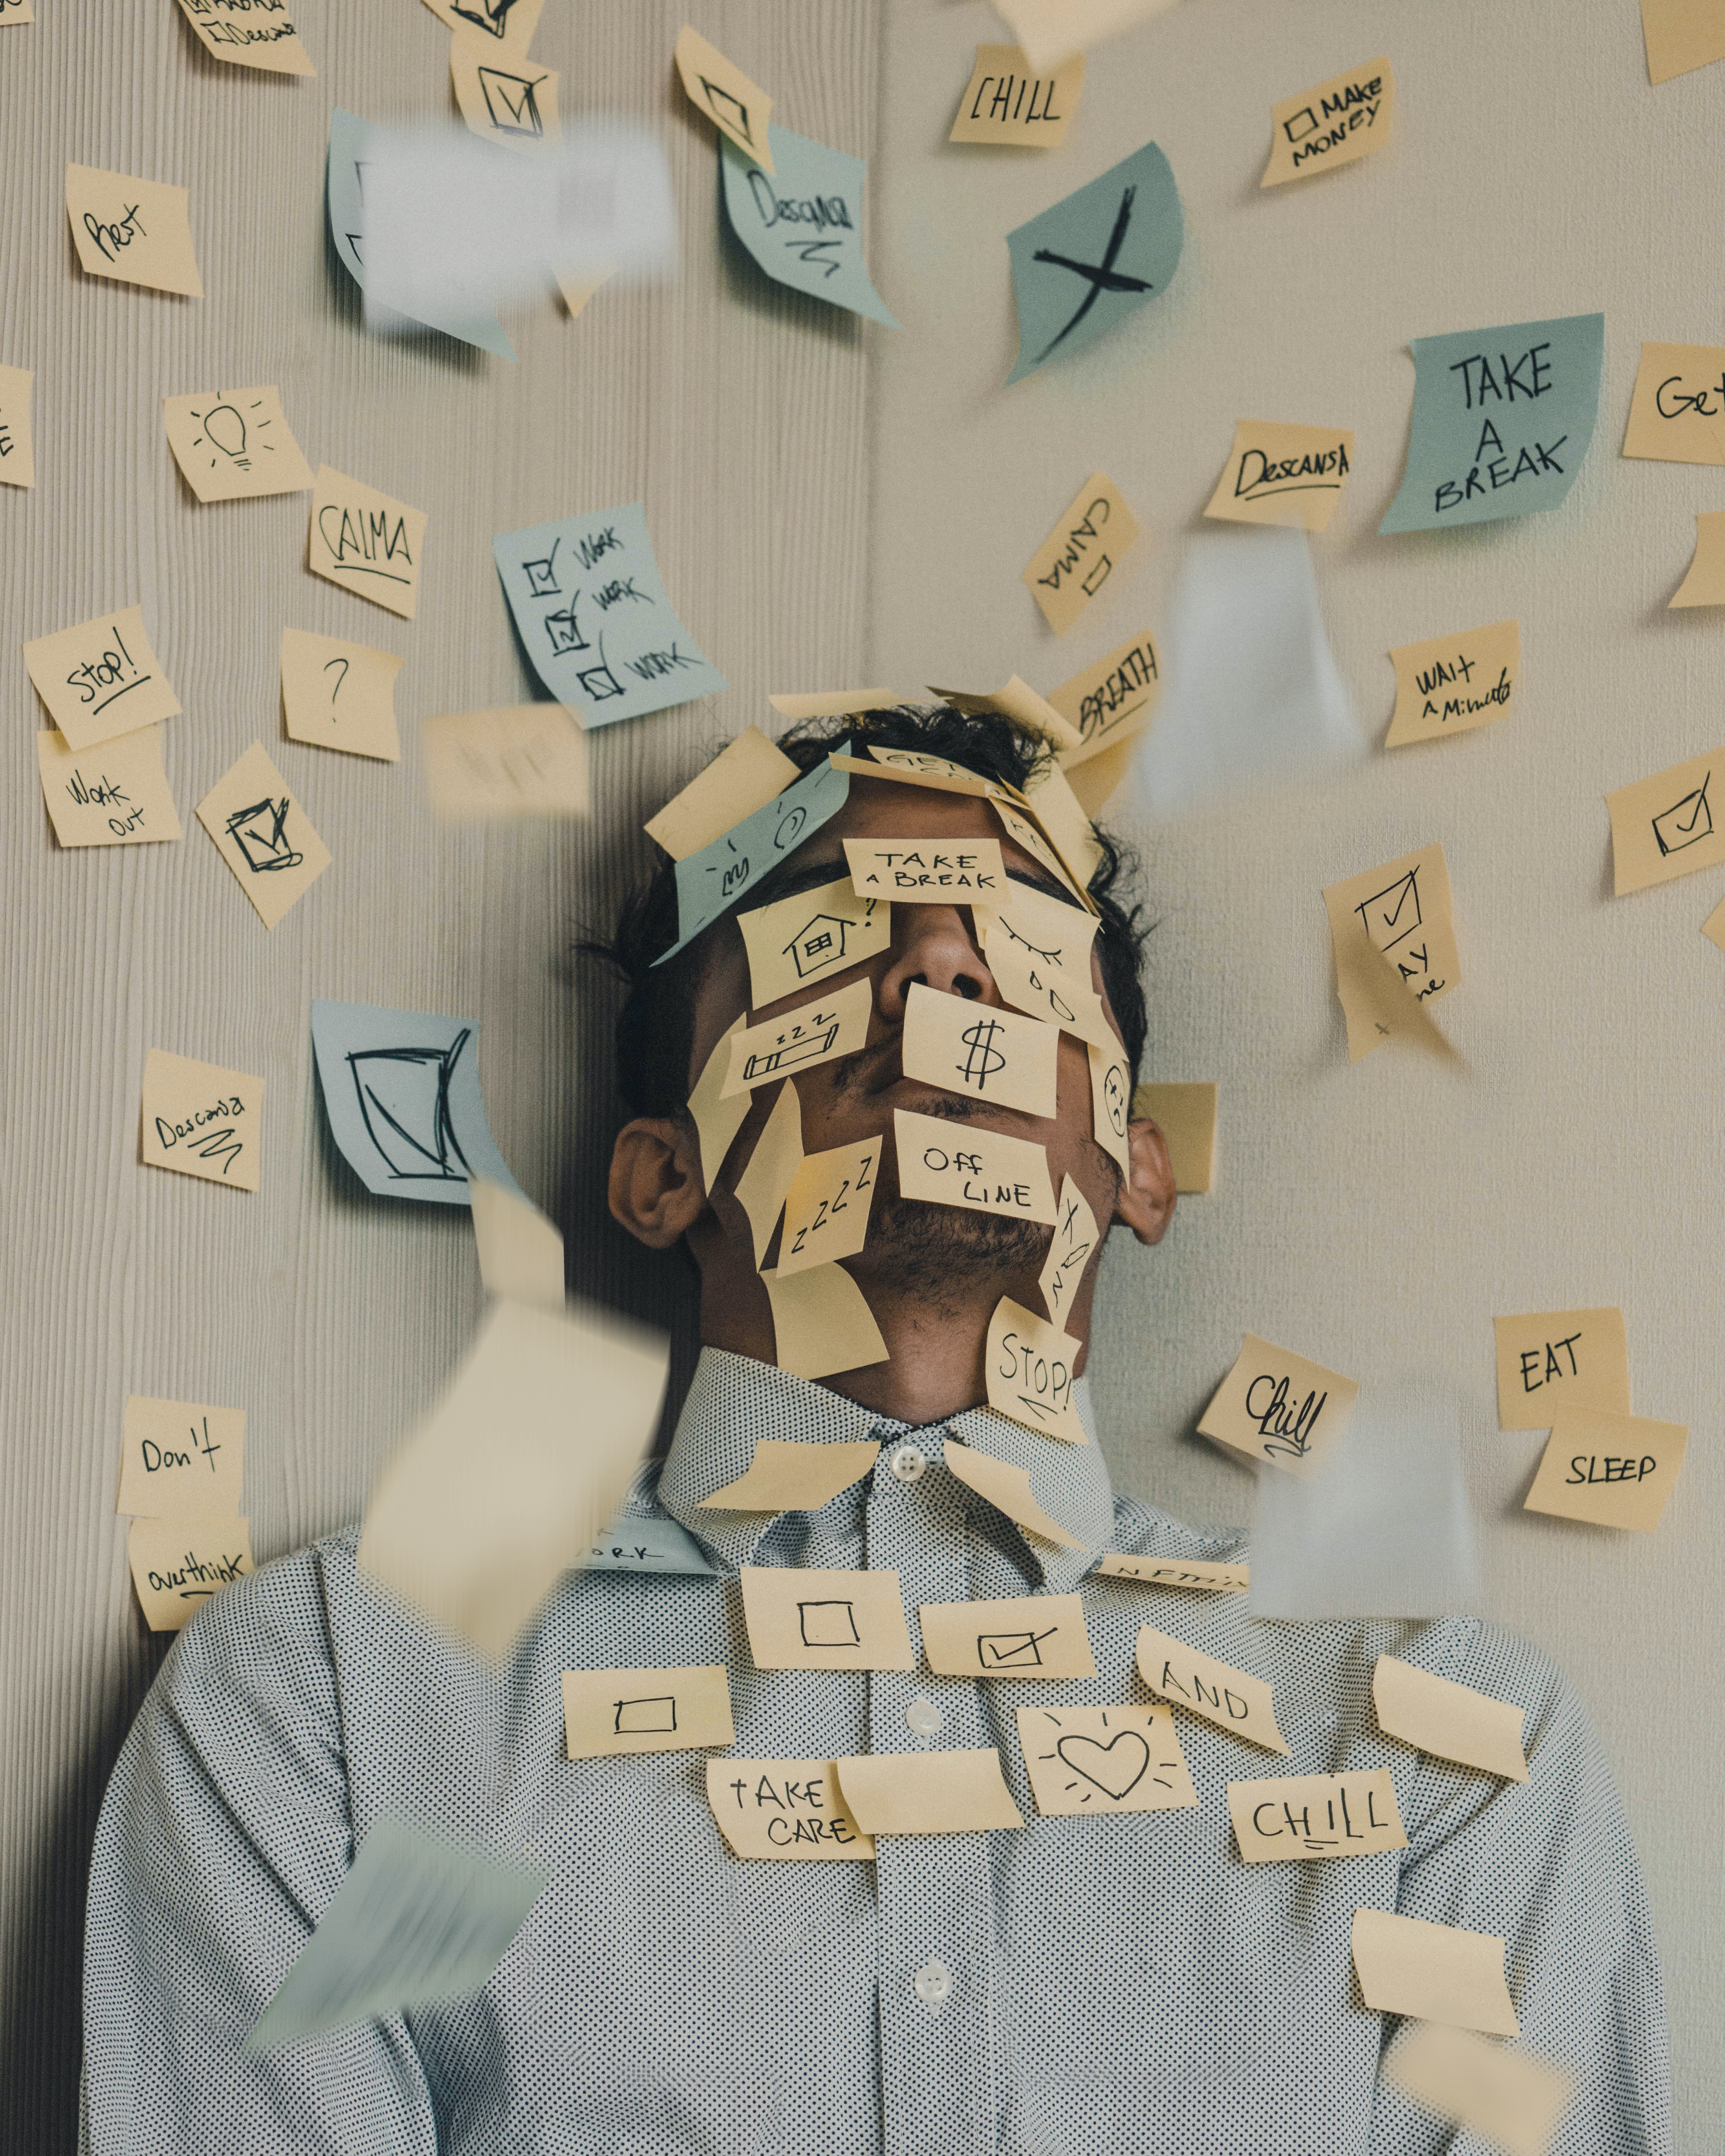 Young man covered in sticky notes, work overload